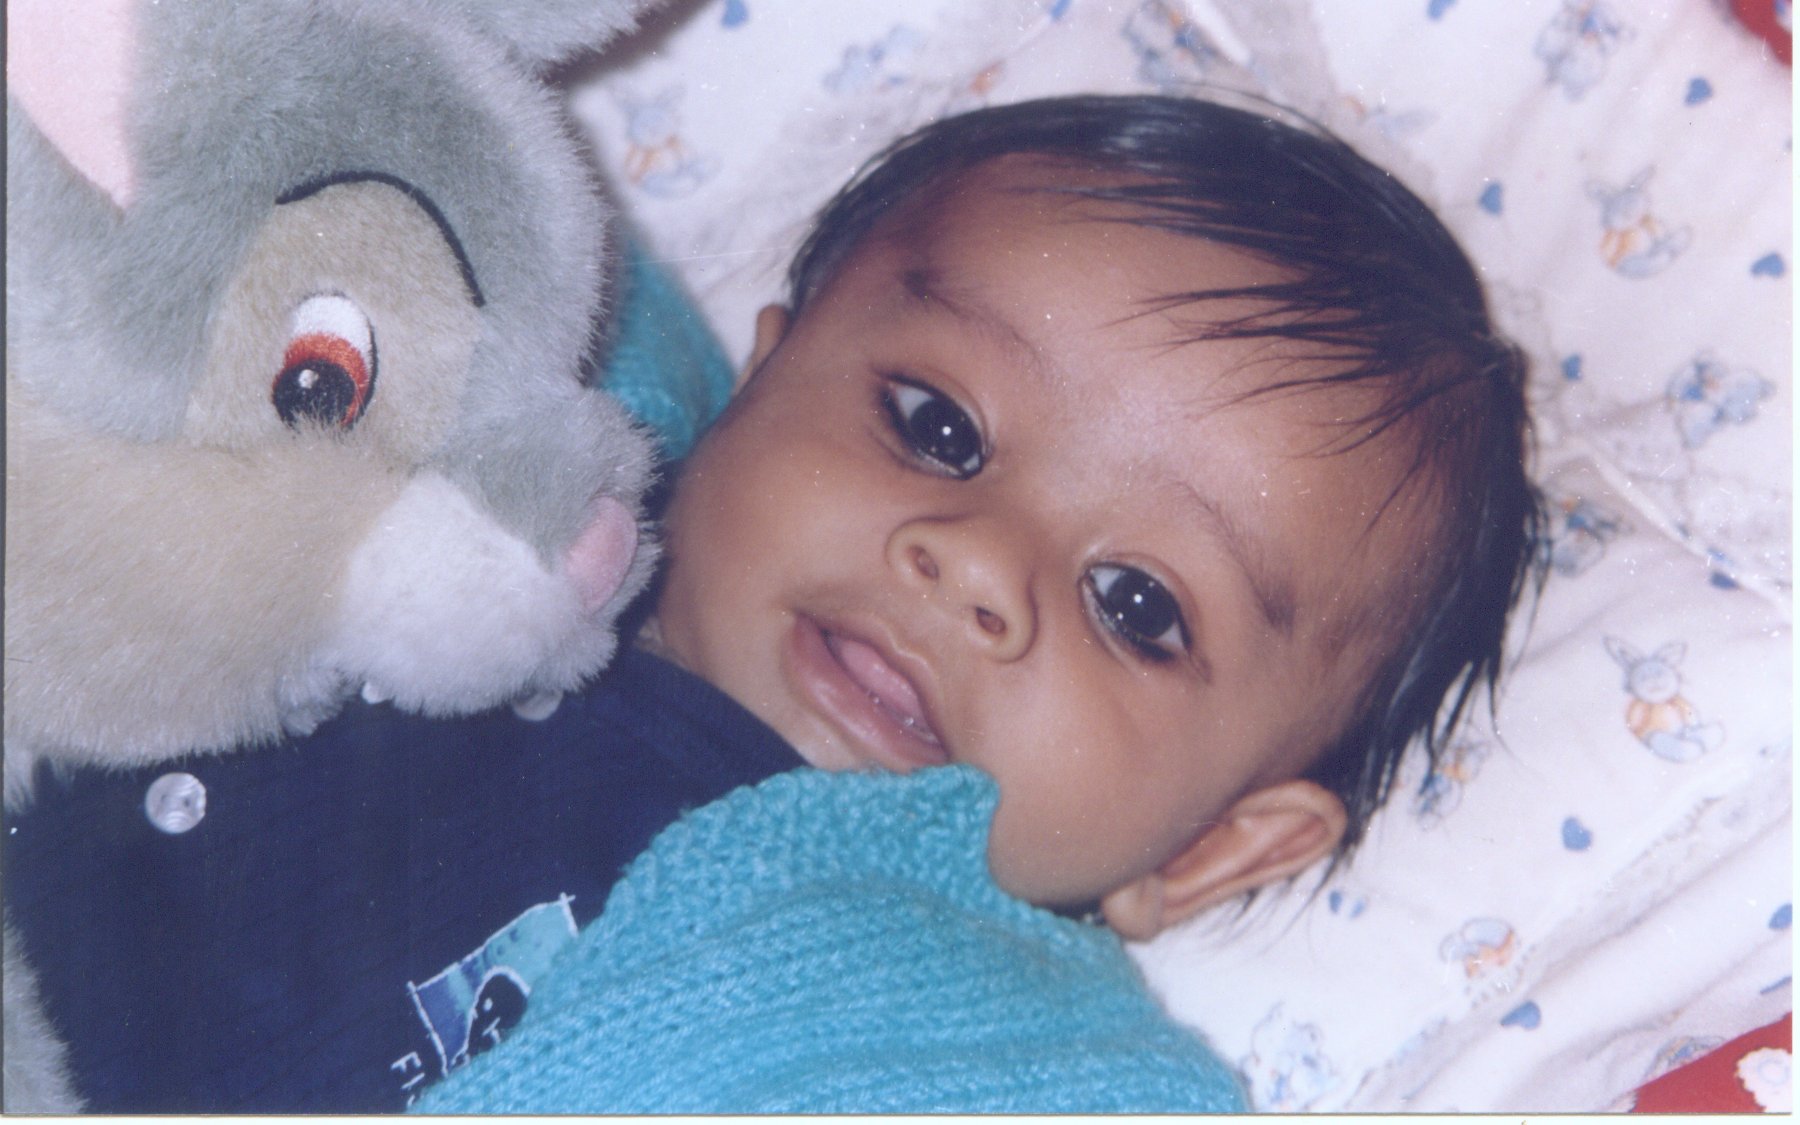 Vansh with his Bunny. Click to see larger image.